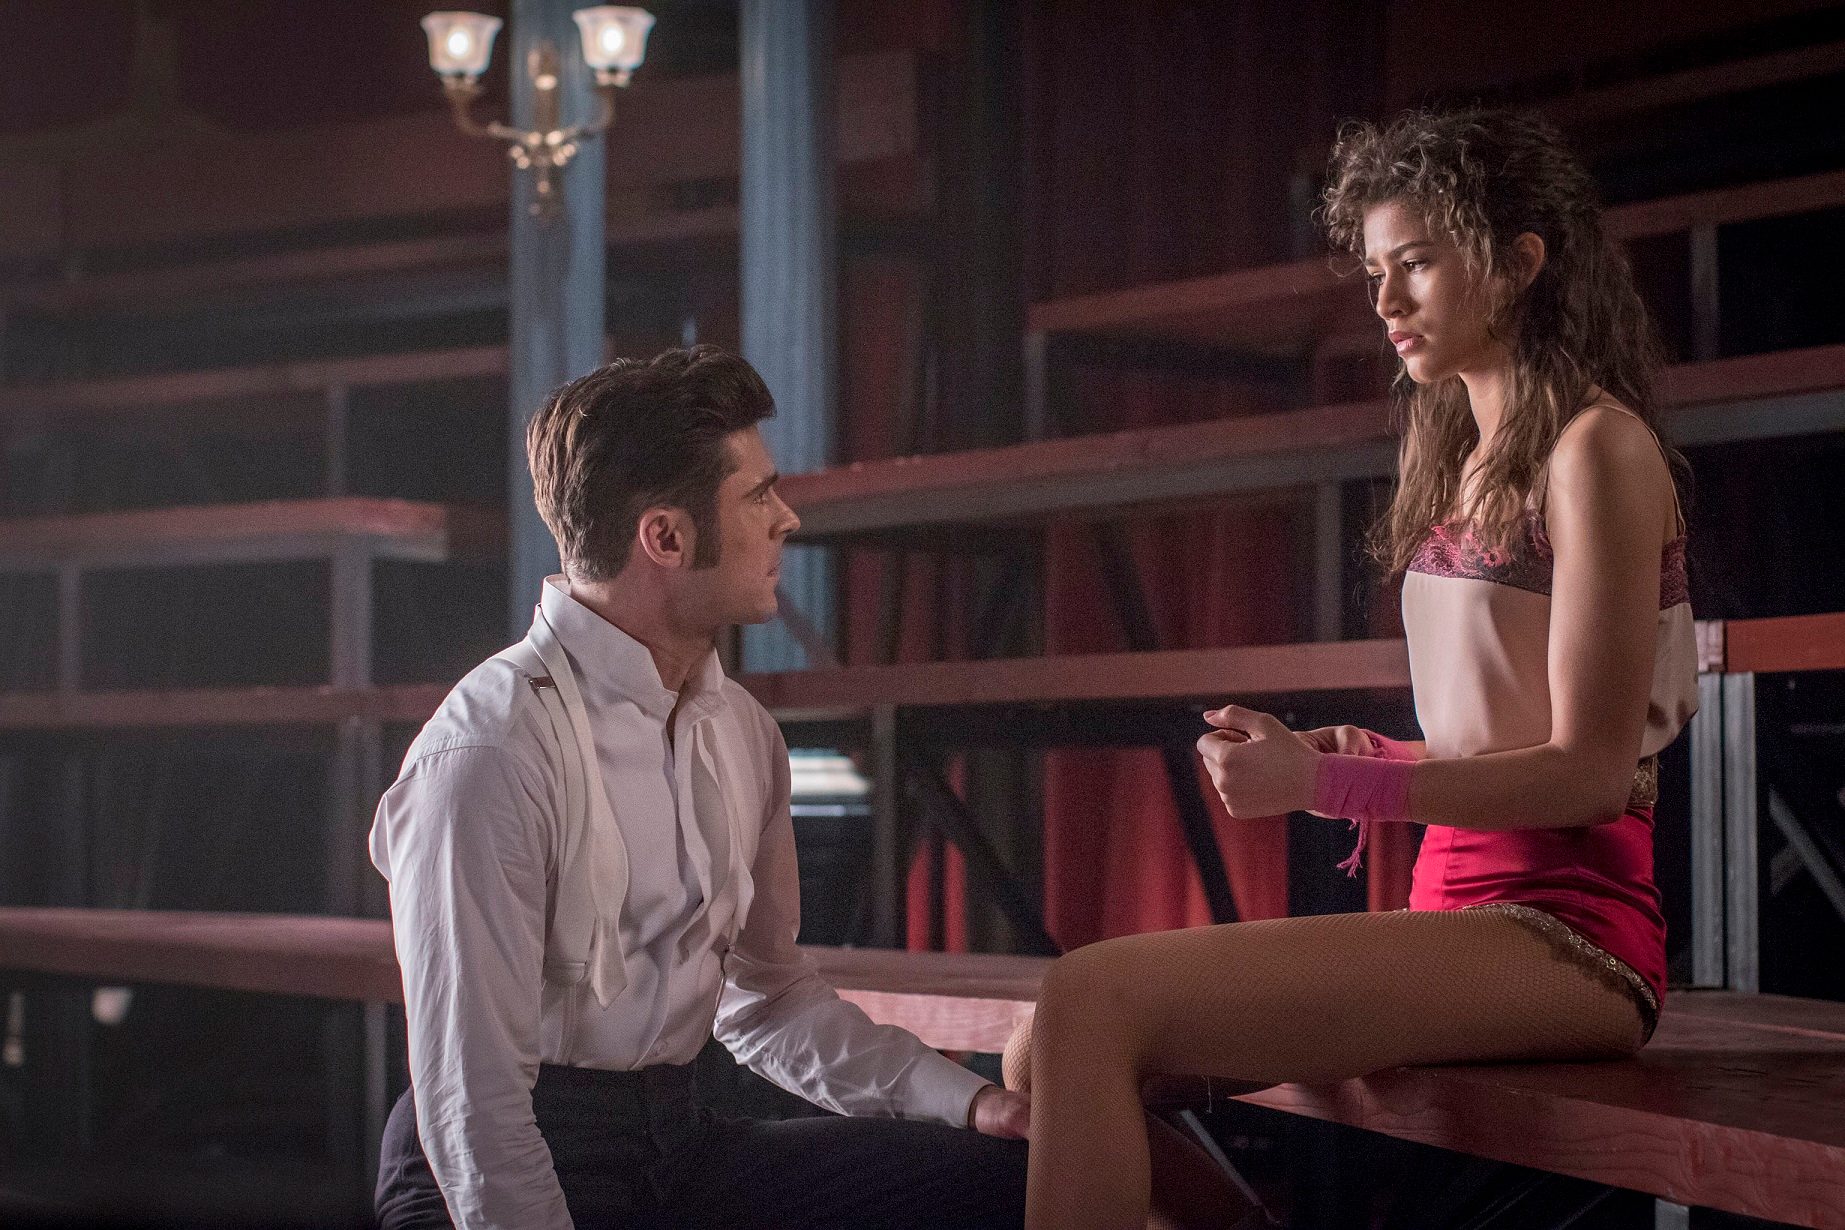 UNEXPECTED CHEMISTRY. Zac Efron and Zendaya play unexpected lovers in 'The Greatest Showman' 